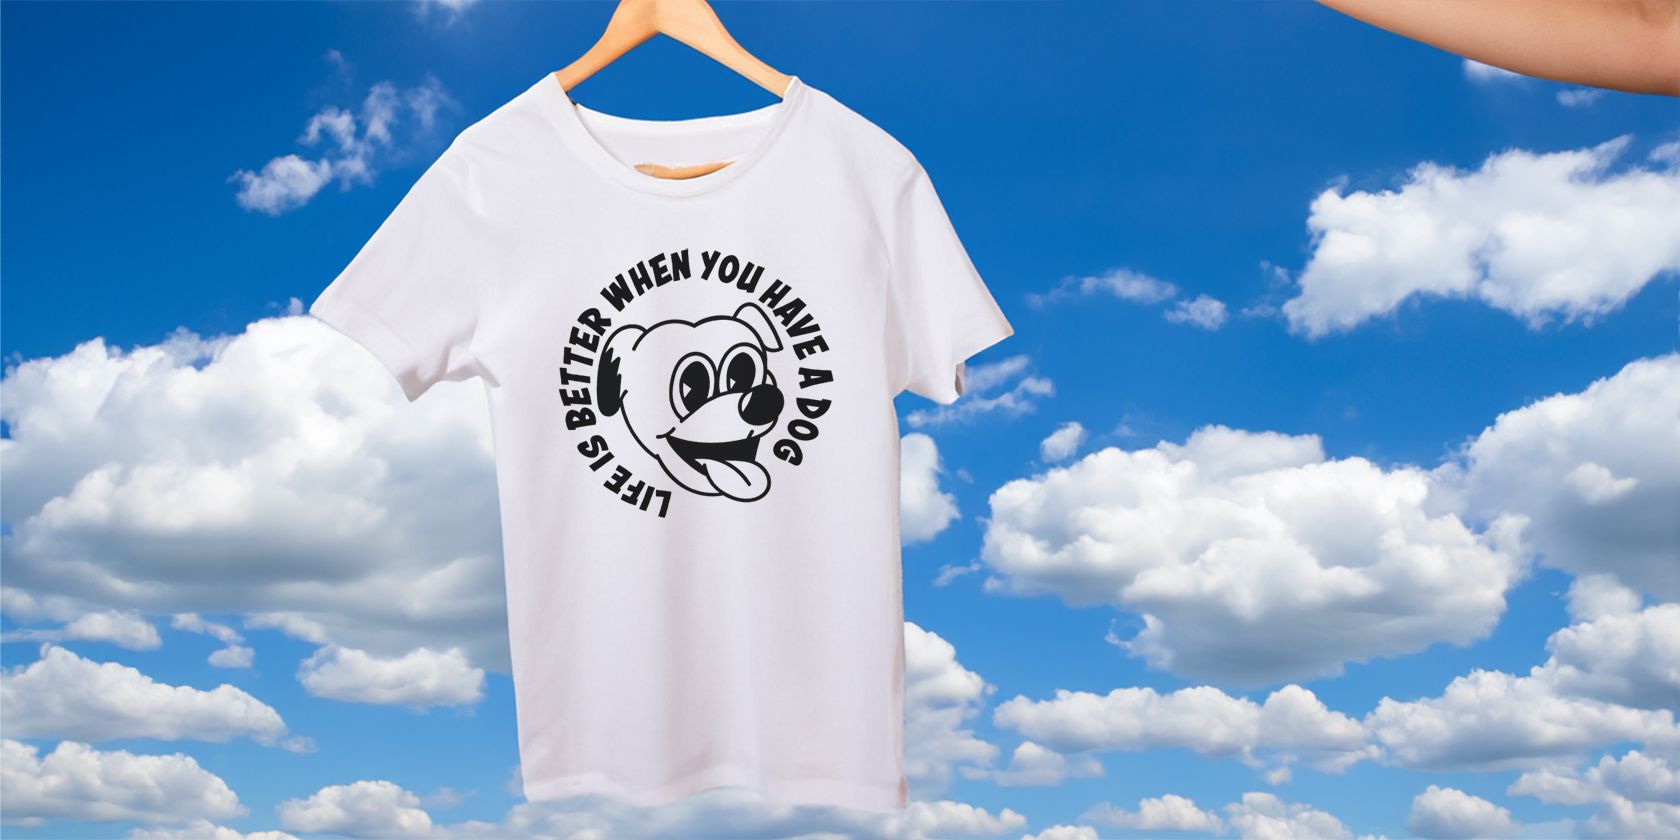 White t-shirt with dog graphic floating in blue sky.